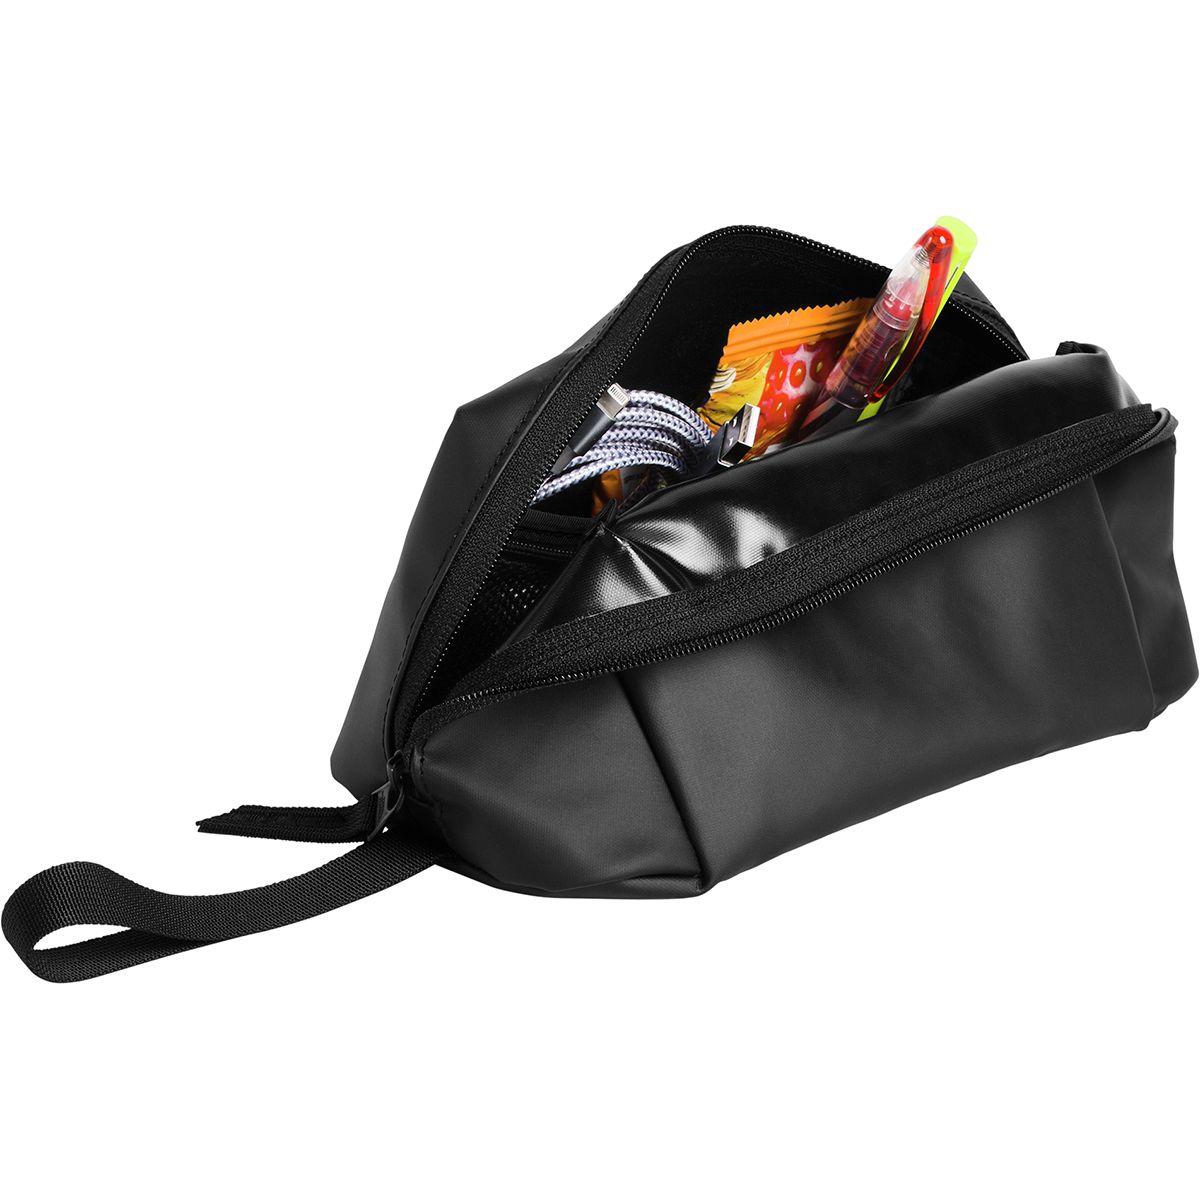 the north face stratoliner toiletry kit